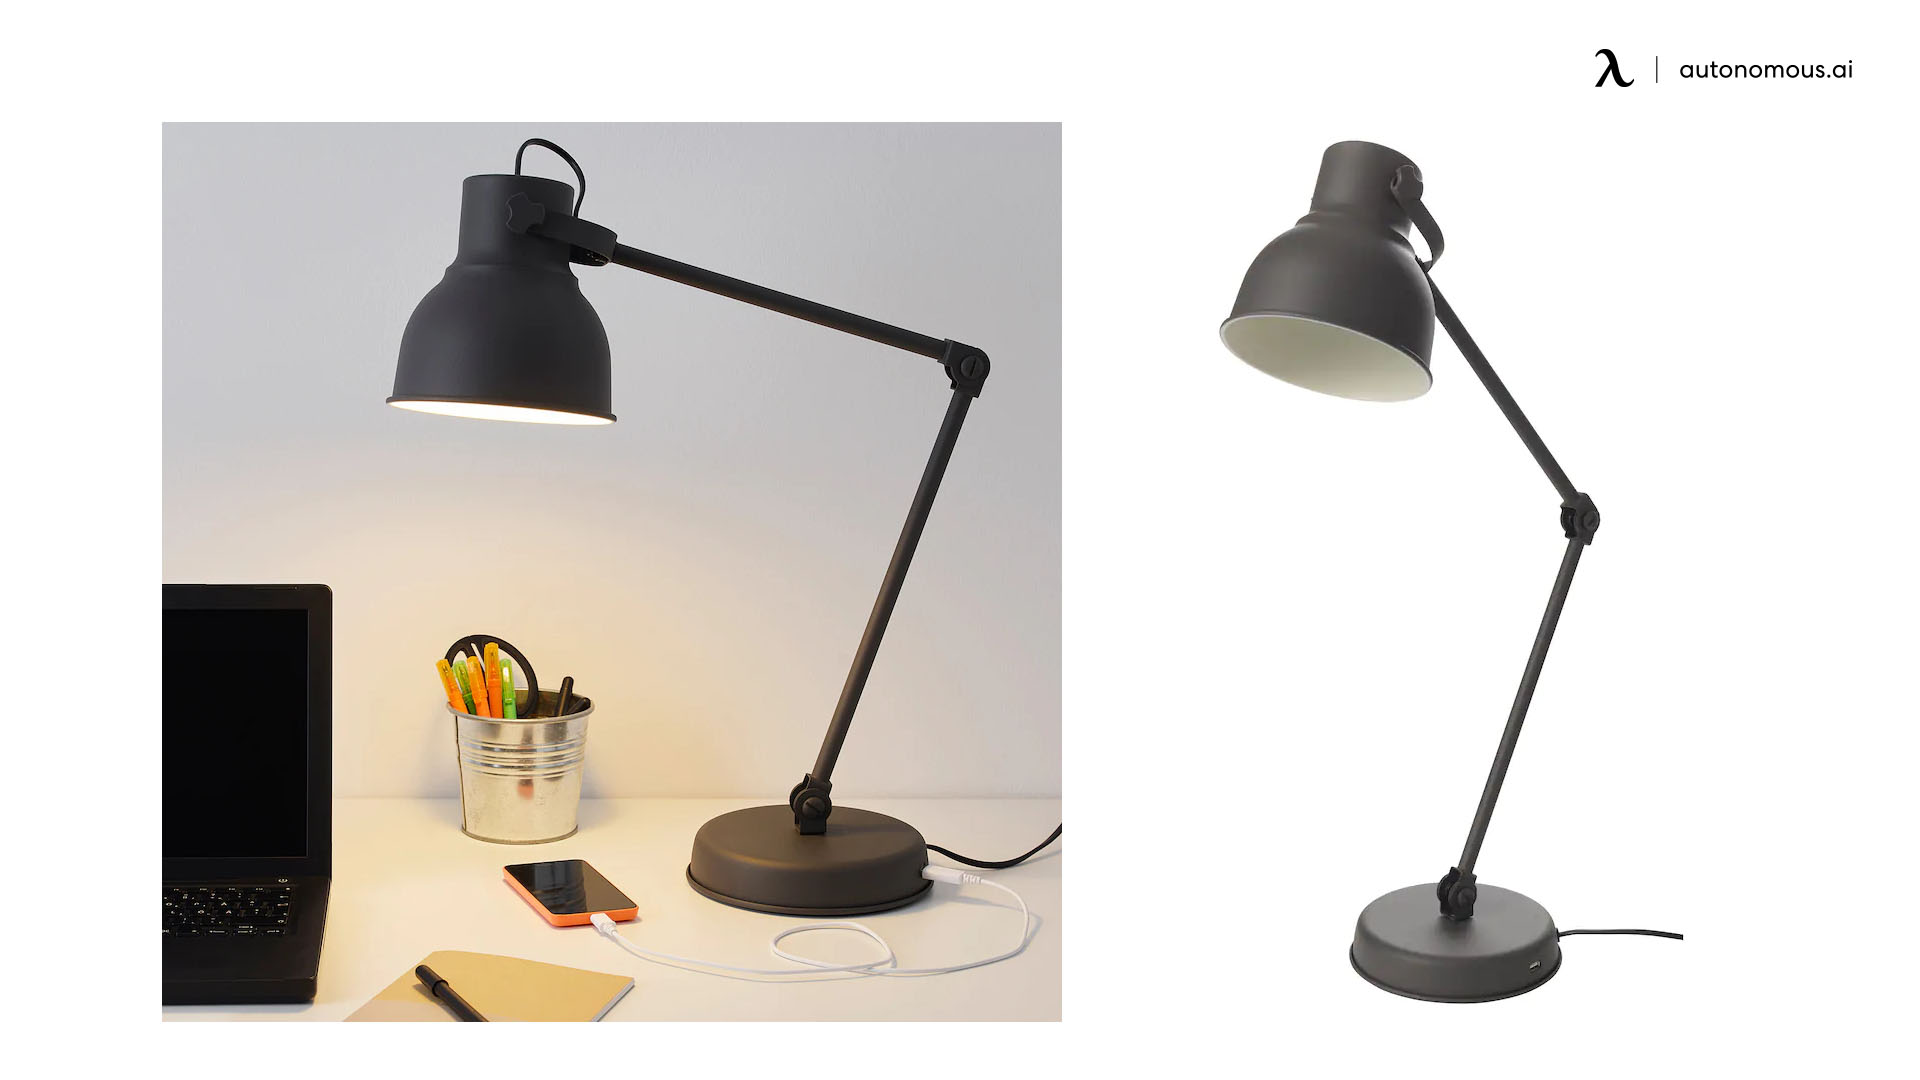 Led Desk Light For An Rgb Setup, Franklin Iron Works Industrial Table Lamp With Usb Port Ikea